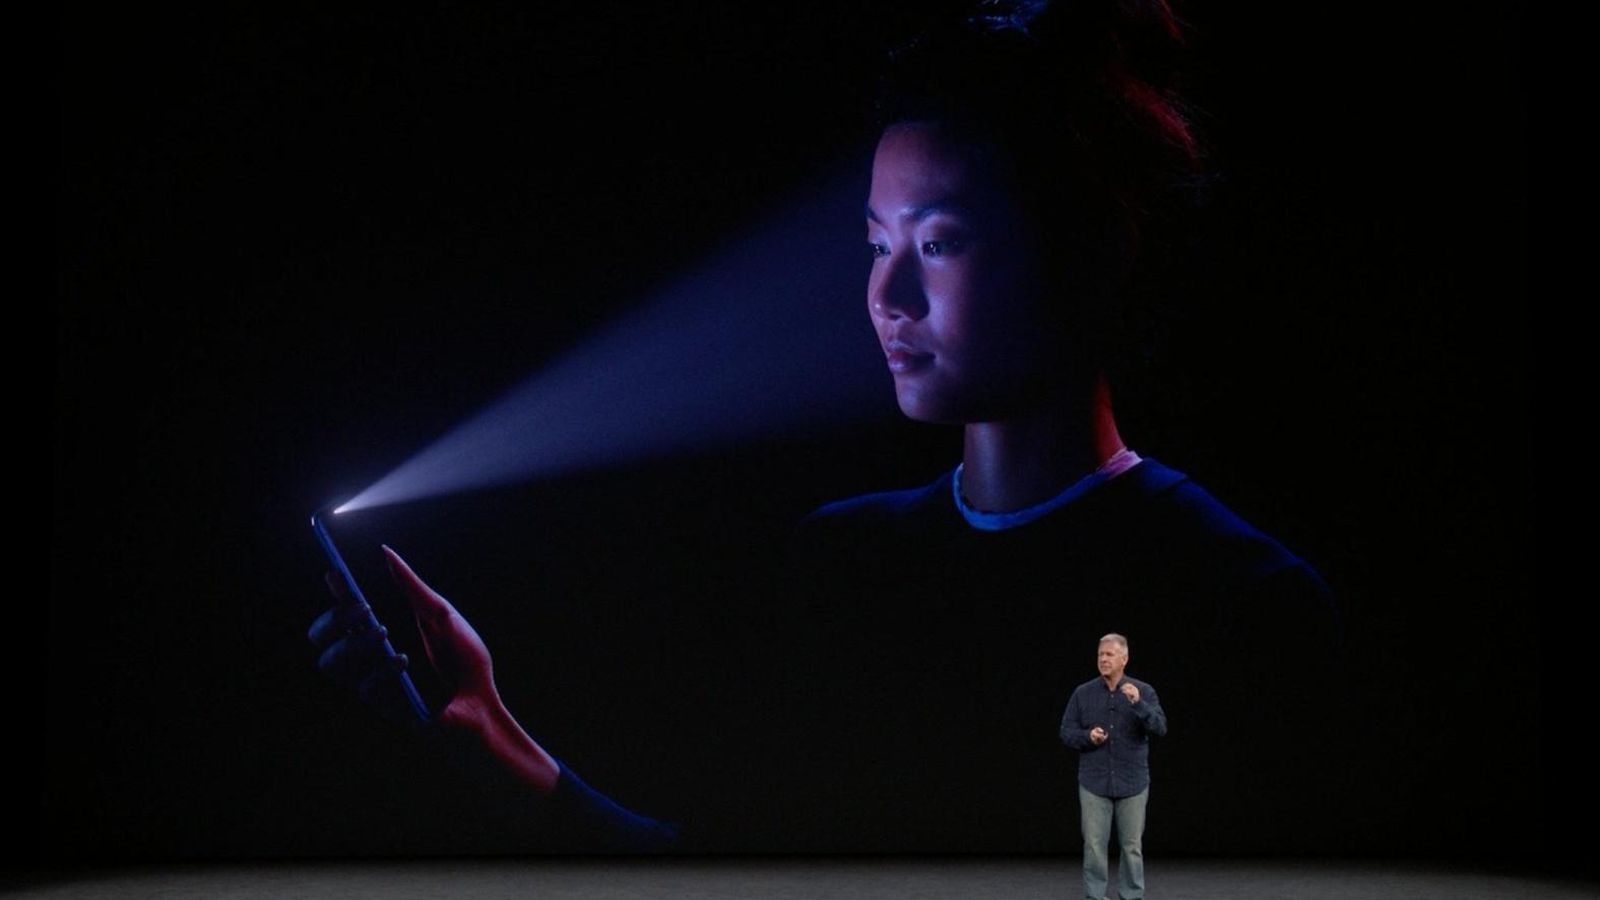 More about Apple's Face ID